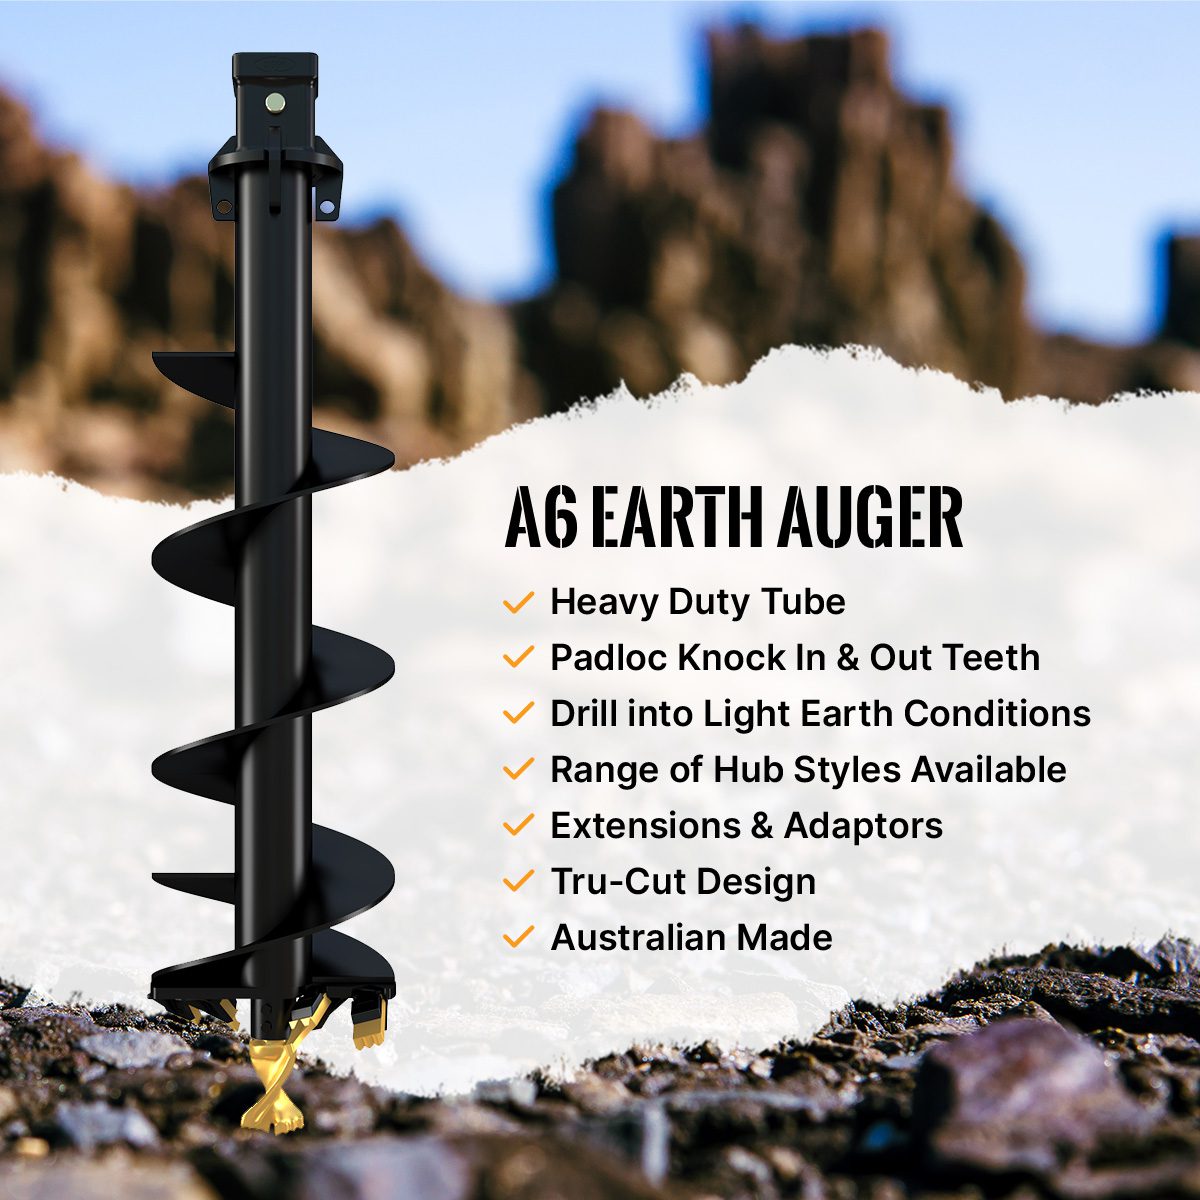 A6 Earth Auger